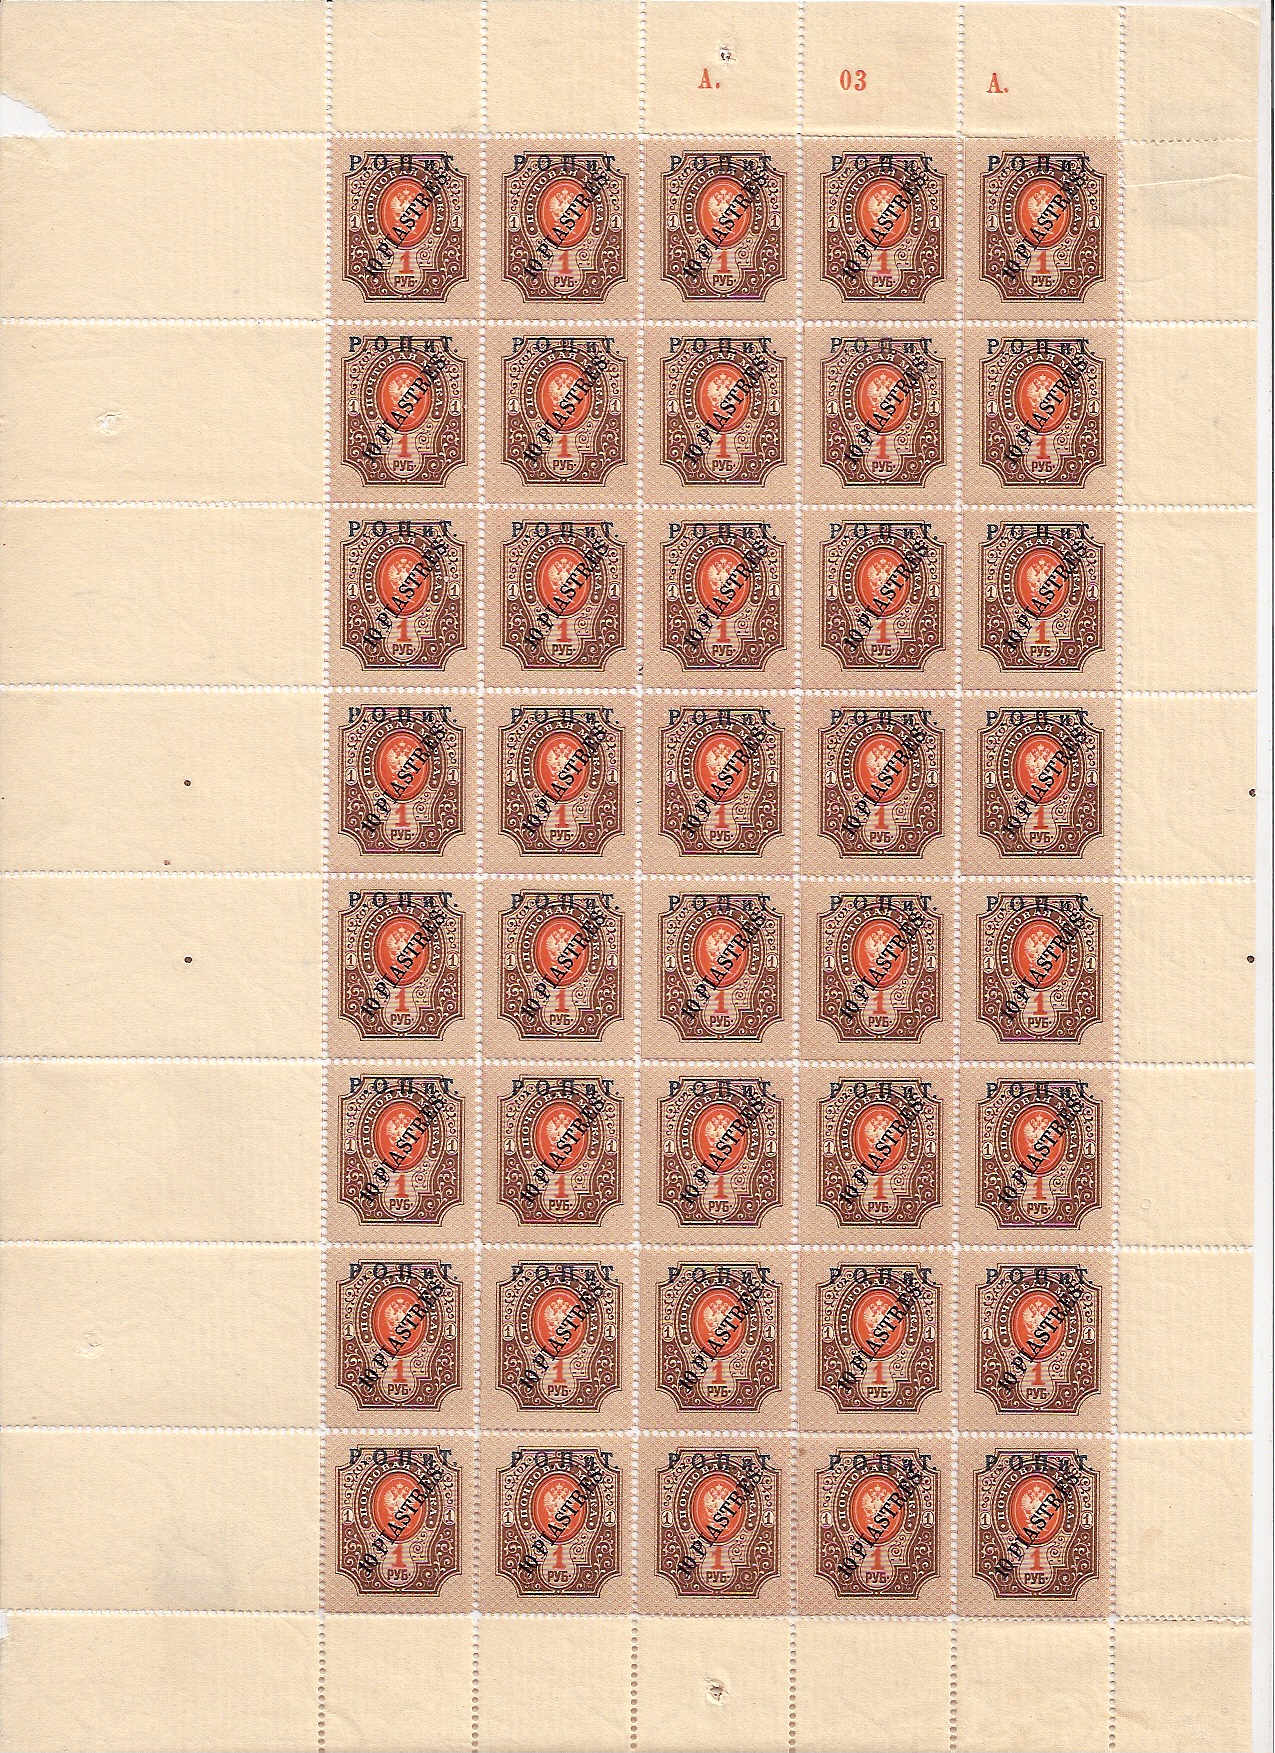 Offices and States - Turkey R.O.P.I.T. overprints Scott 378 